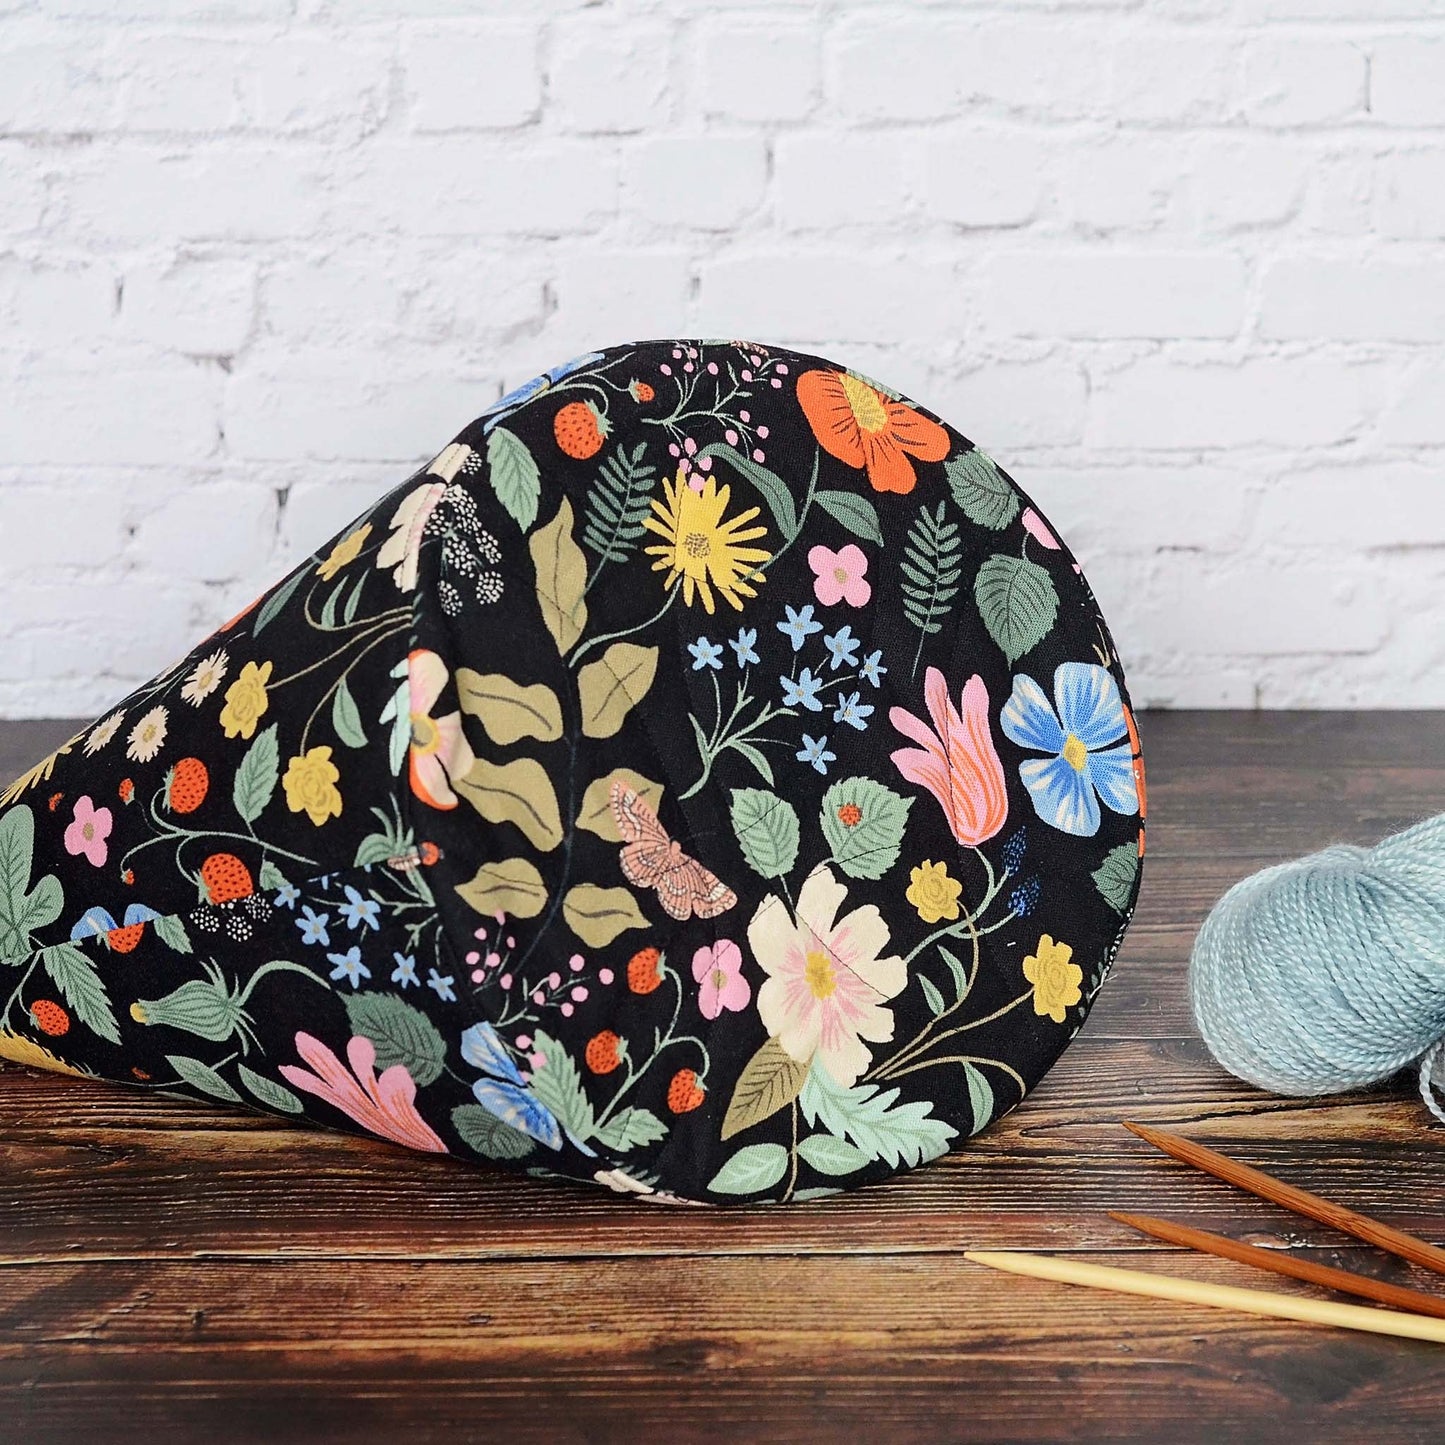 Bucket style knitting bag with multiple pockets.  Made from a black floral canvas from Rifle Paper Co's Strawberry Fields.  Made in Canada by Yellow Petal Handmade.